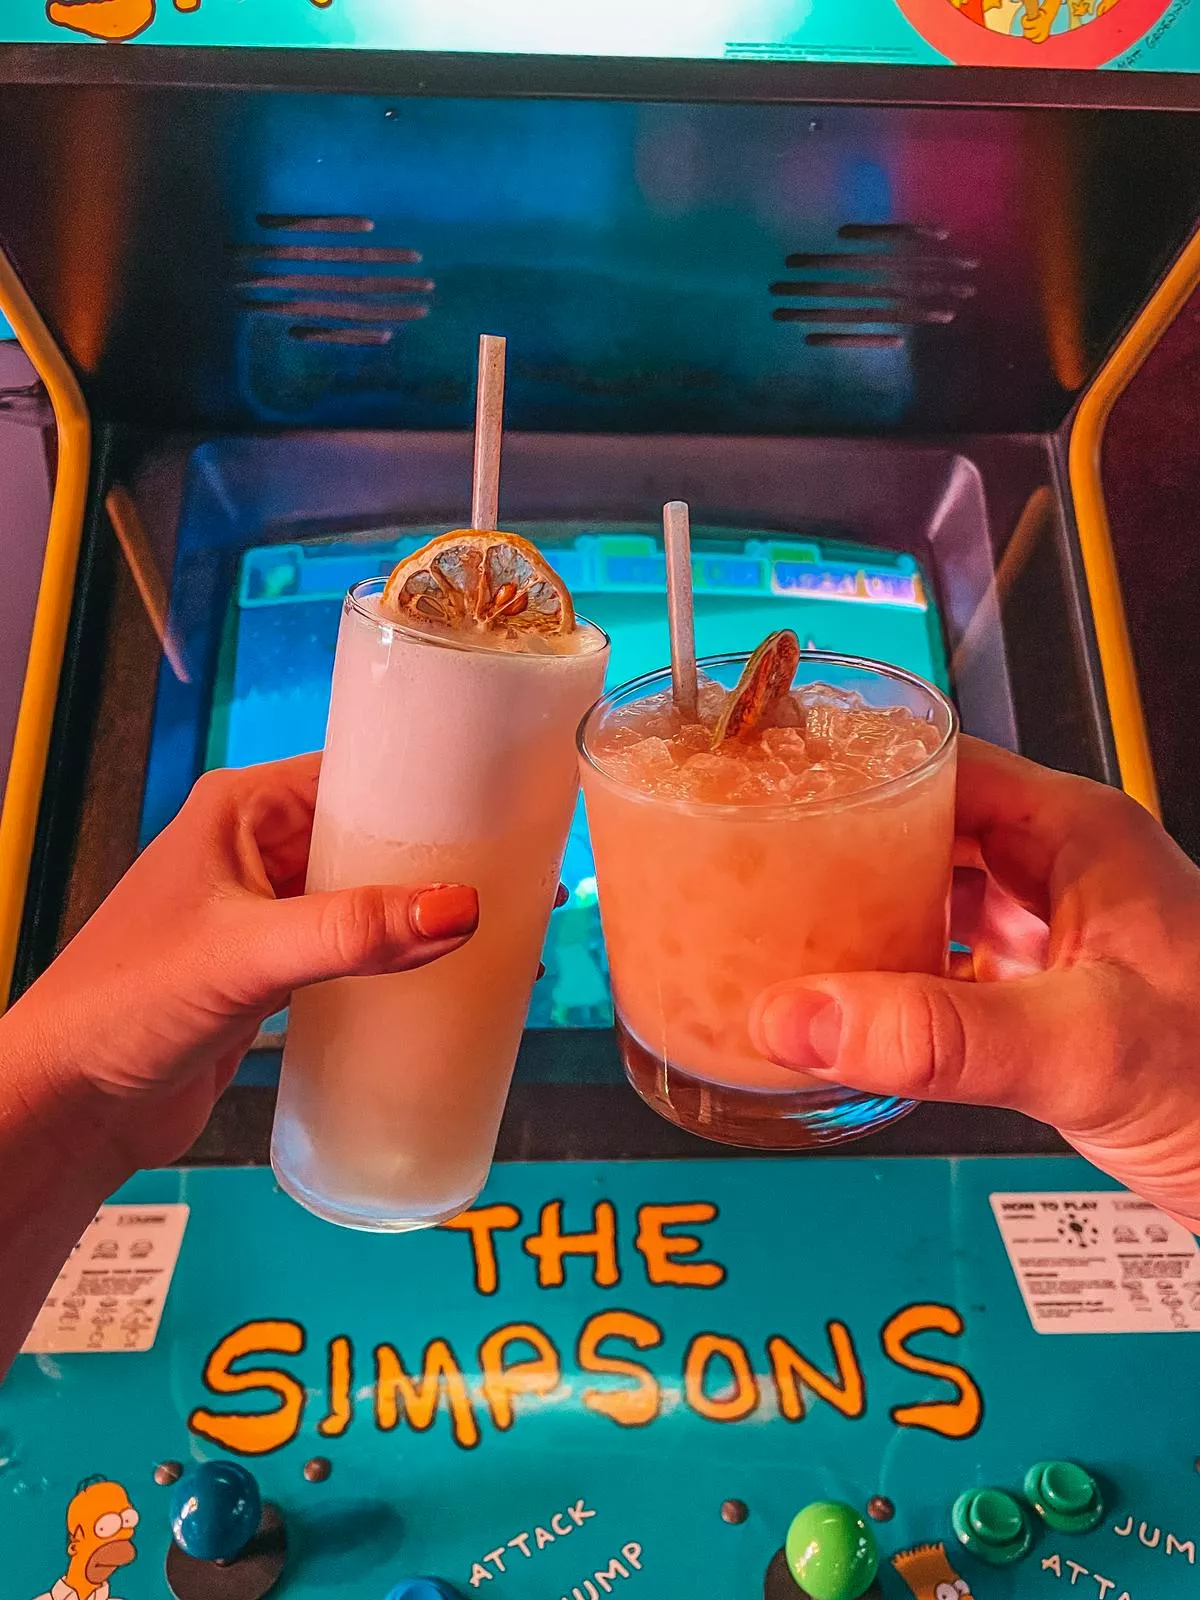 Cocktails from Quarters arcade bar in Salt Lake City